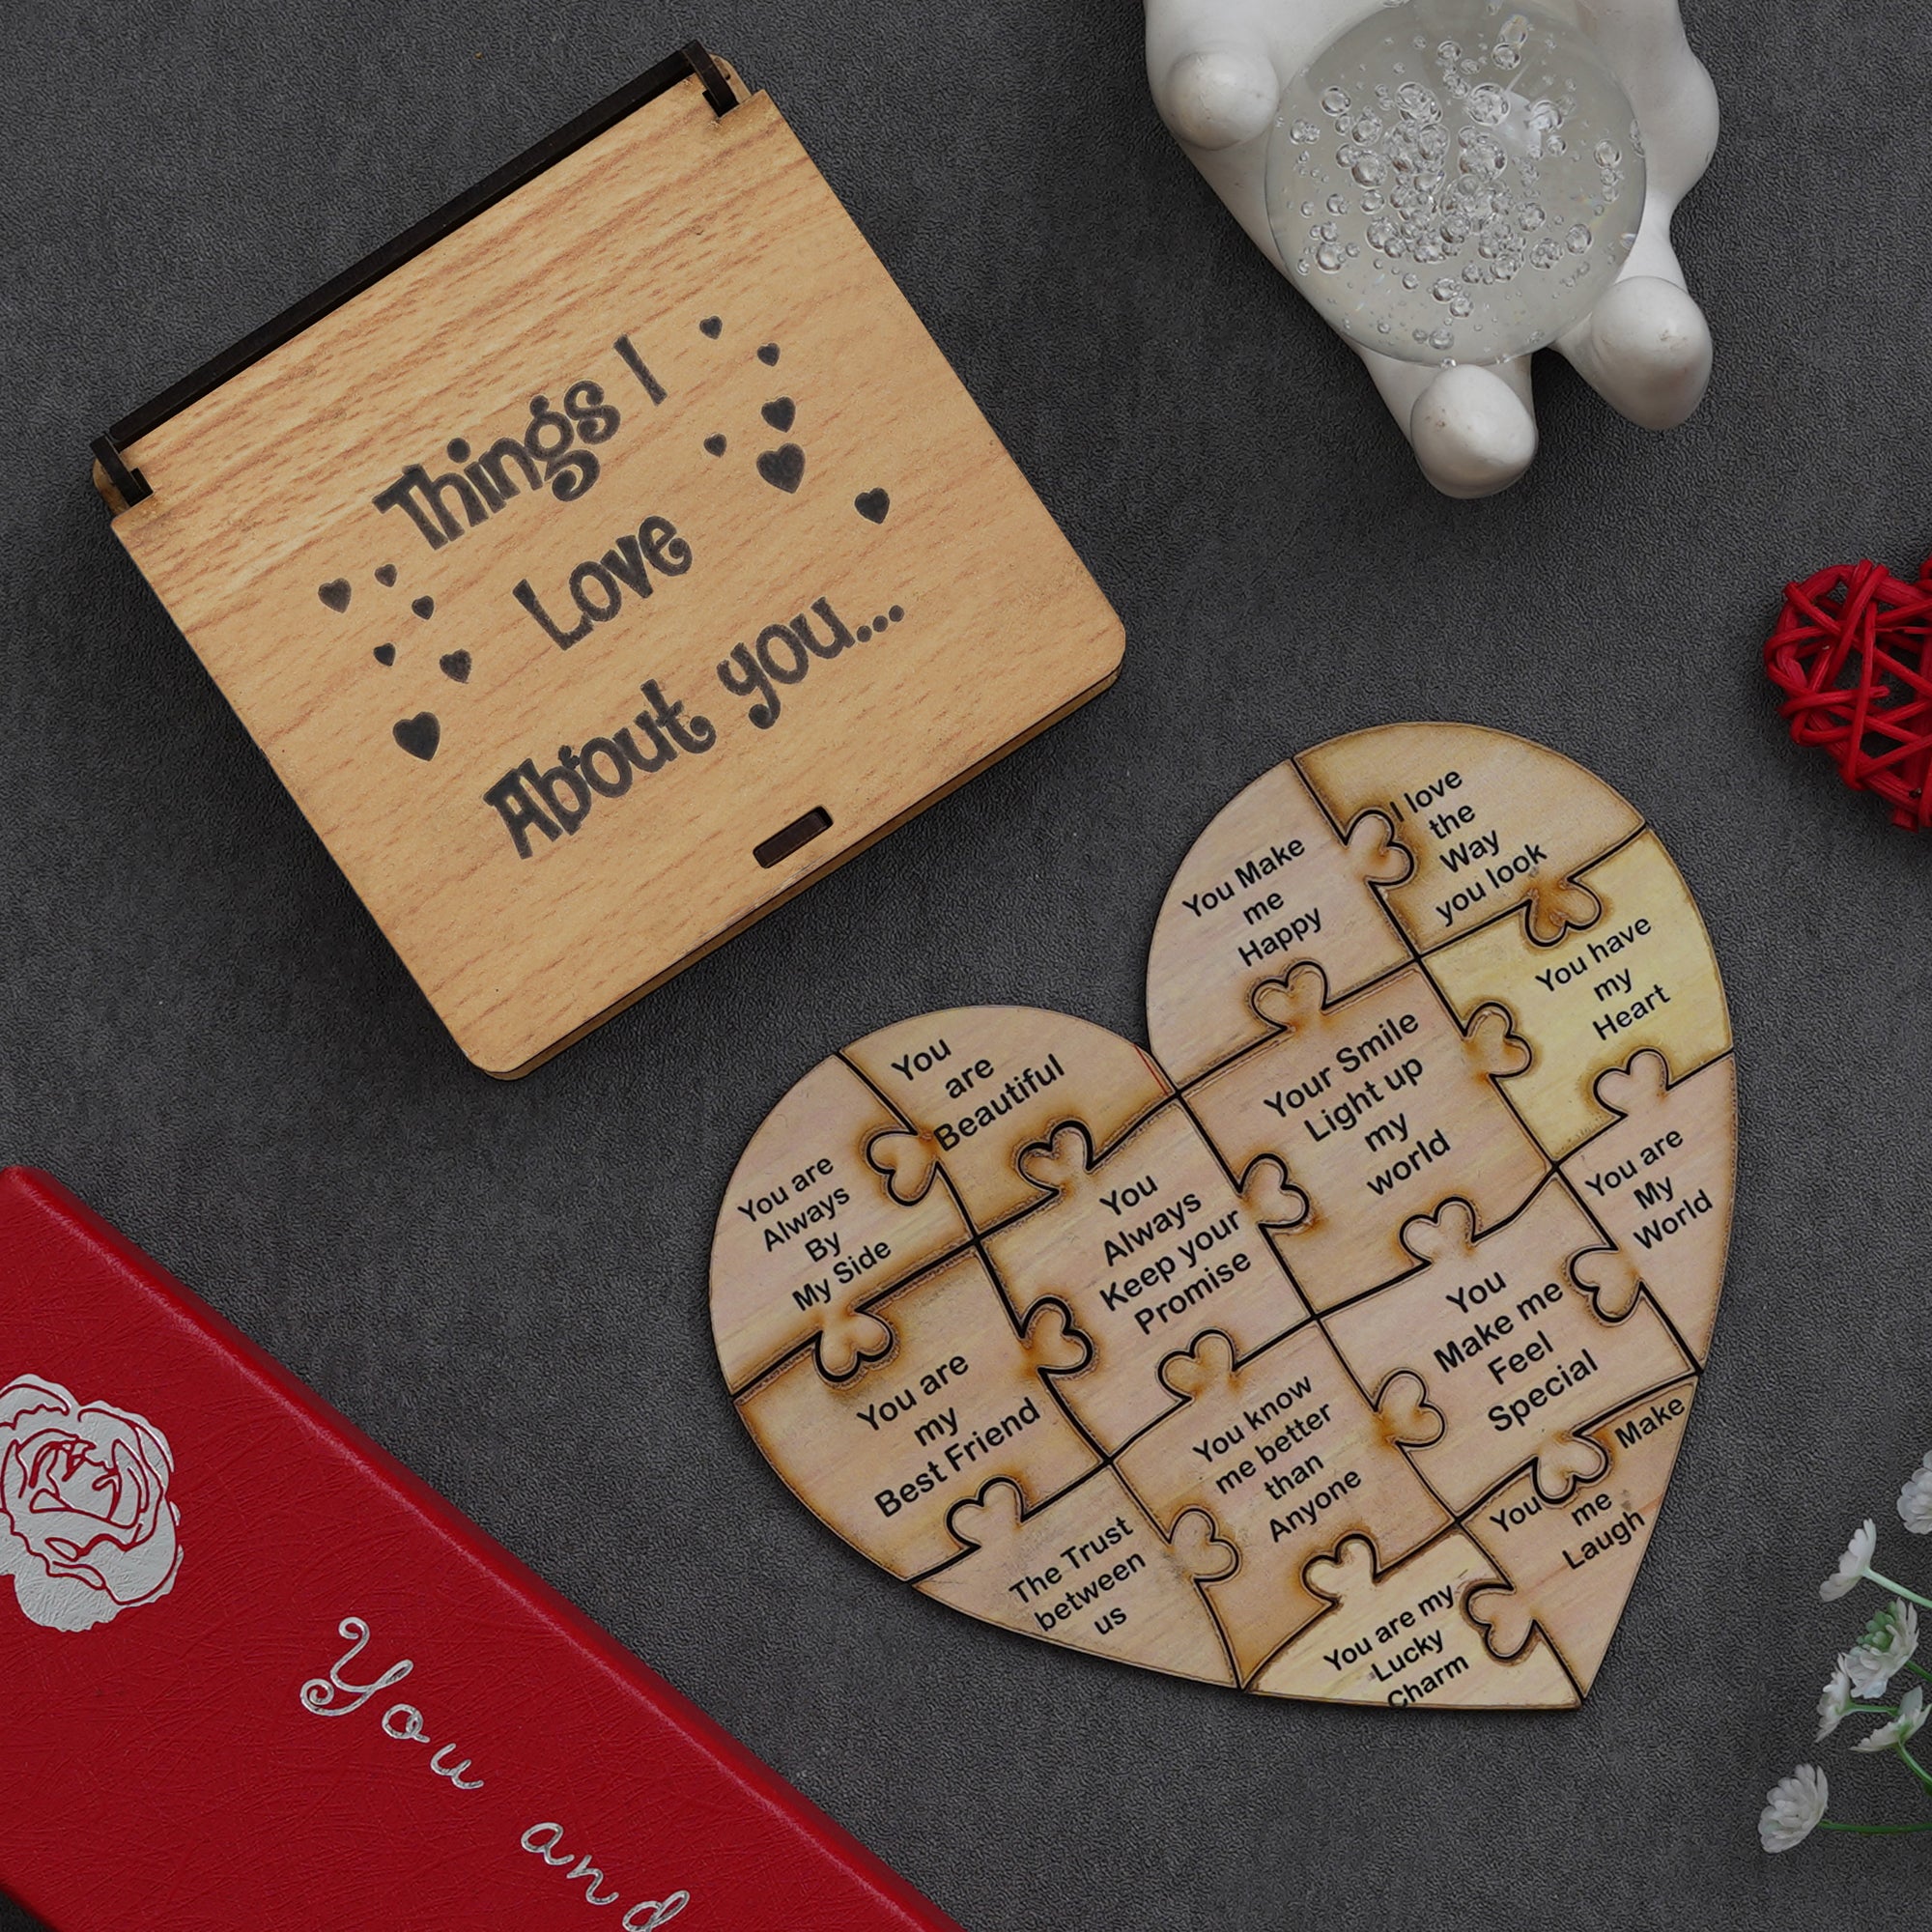 Valentine Combo of Card, "Things I Love About You" Puzzle Wooden Gift Set, Pink Heart Shaped Gift Box with Teddy and Roses 3